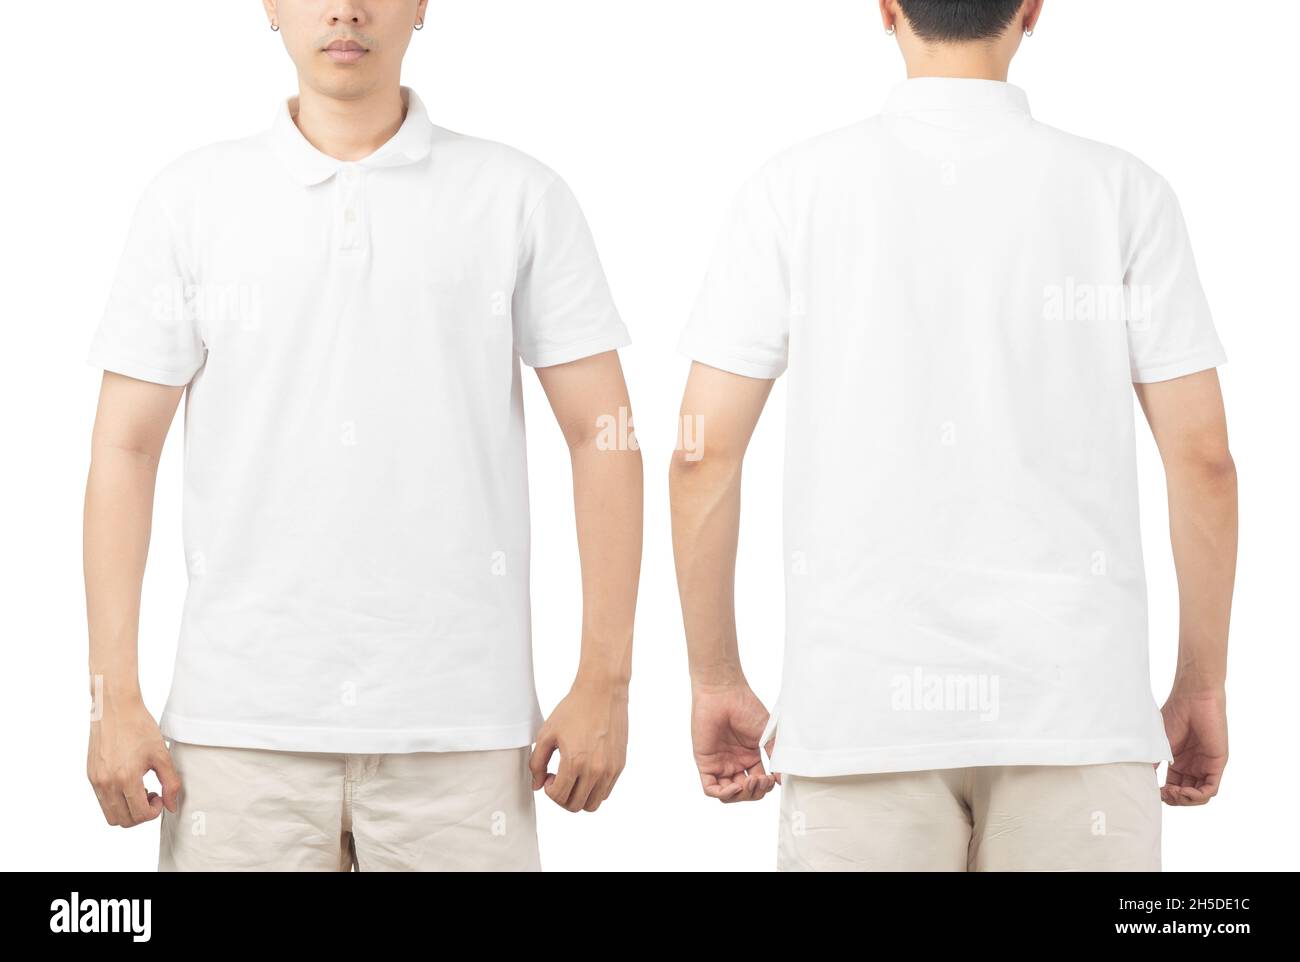 Young man in blank Polo t-shirt mockup front and back used as design template, isolated on white background with clipping path. Stock Photo